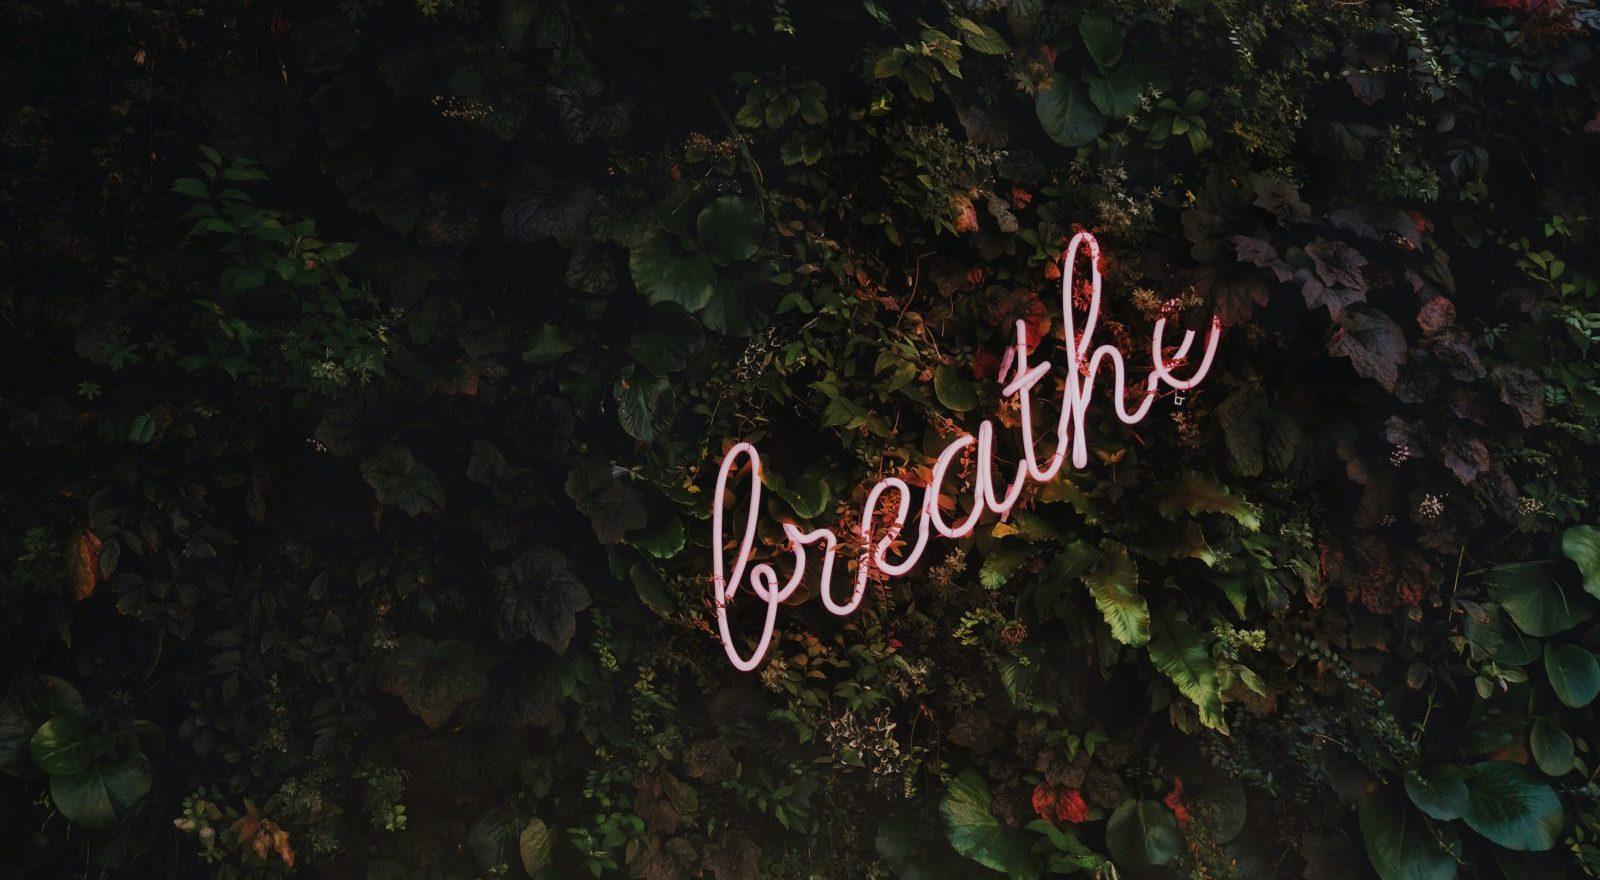 "breathe" in elegant font--a good imagery for promoting a wellness event